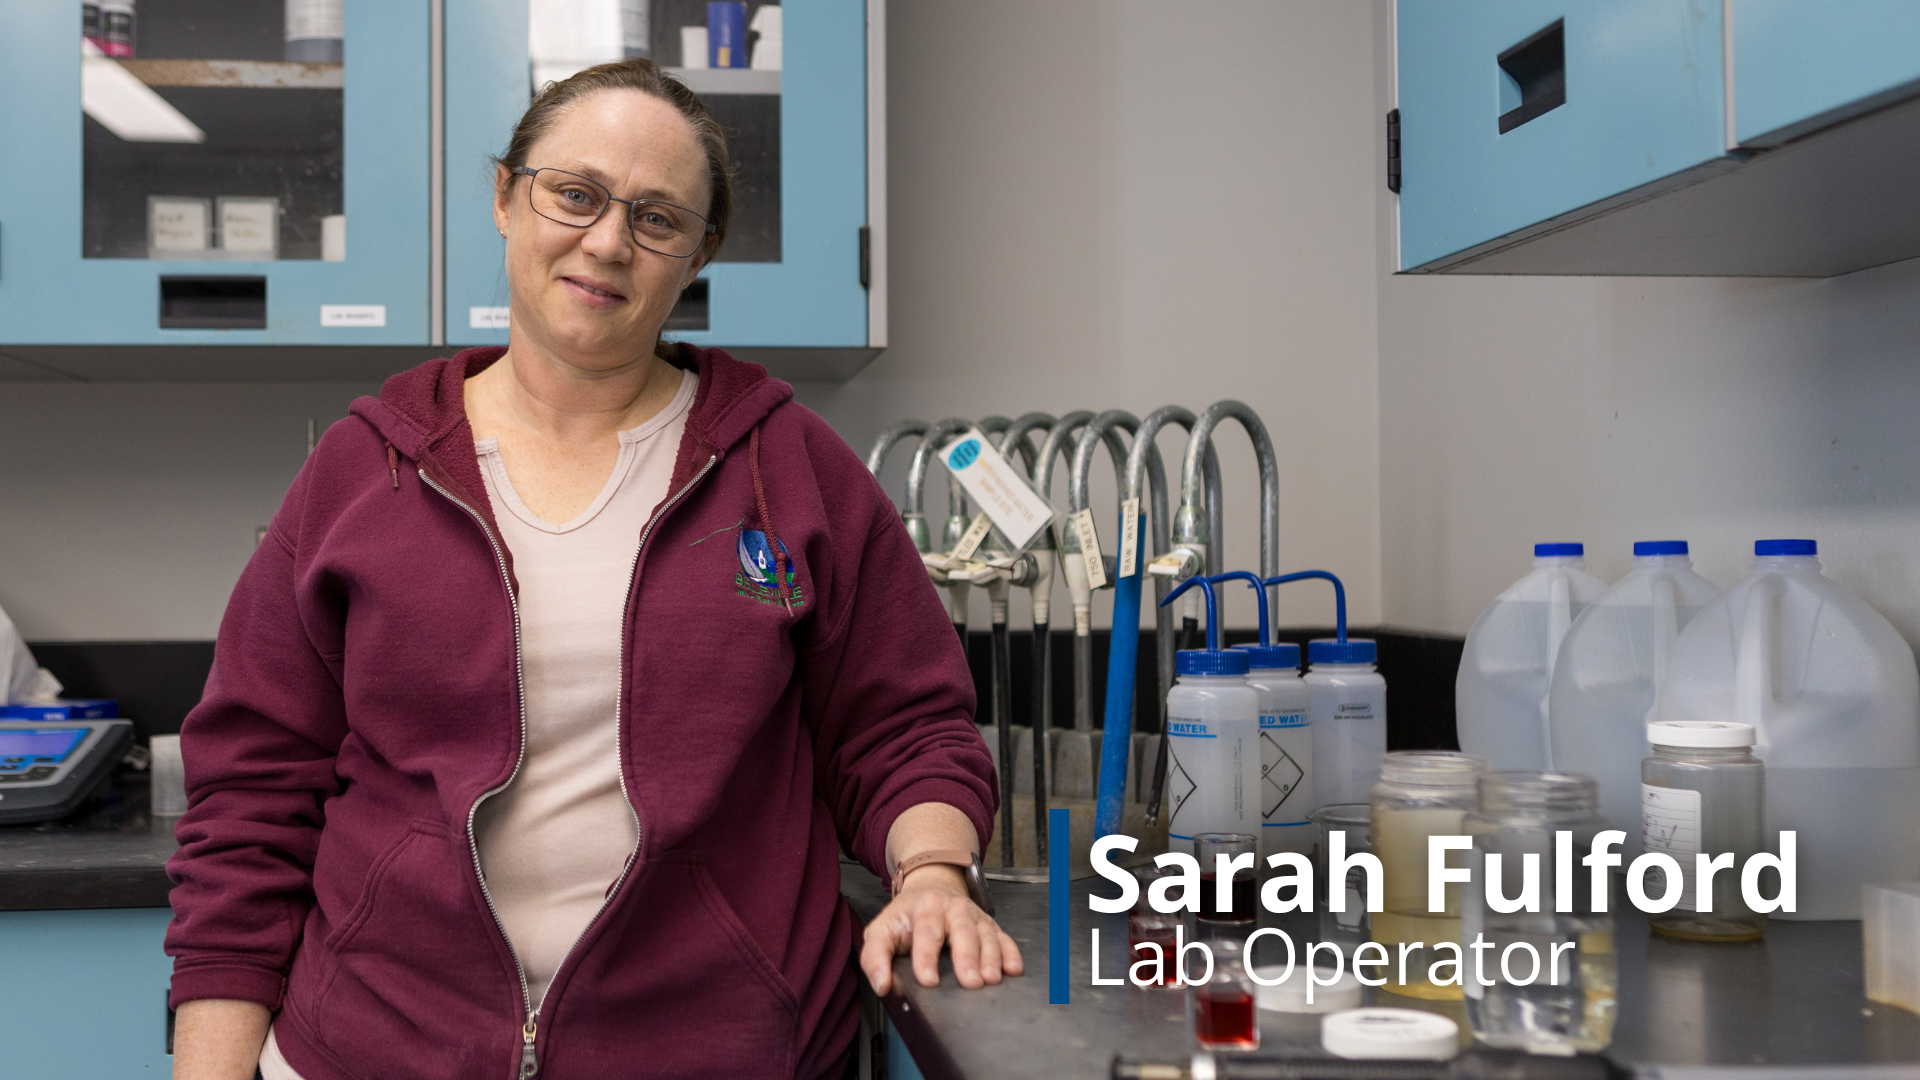 A photo of Sarah Fulford, a Lab Operator, leaning again a counter with beaker and equipment used to test water samples.